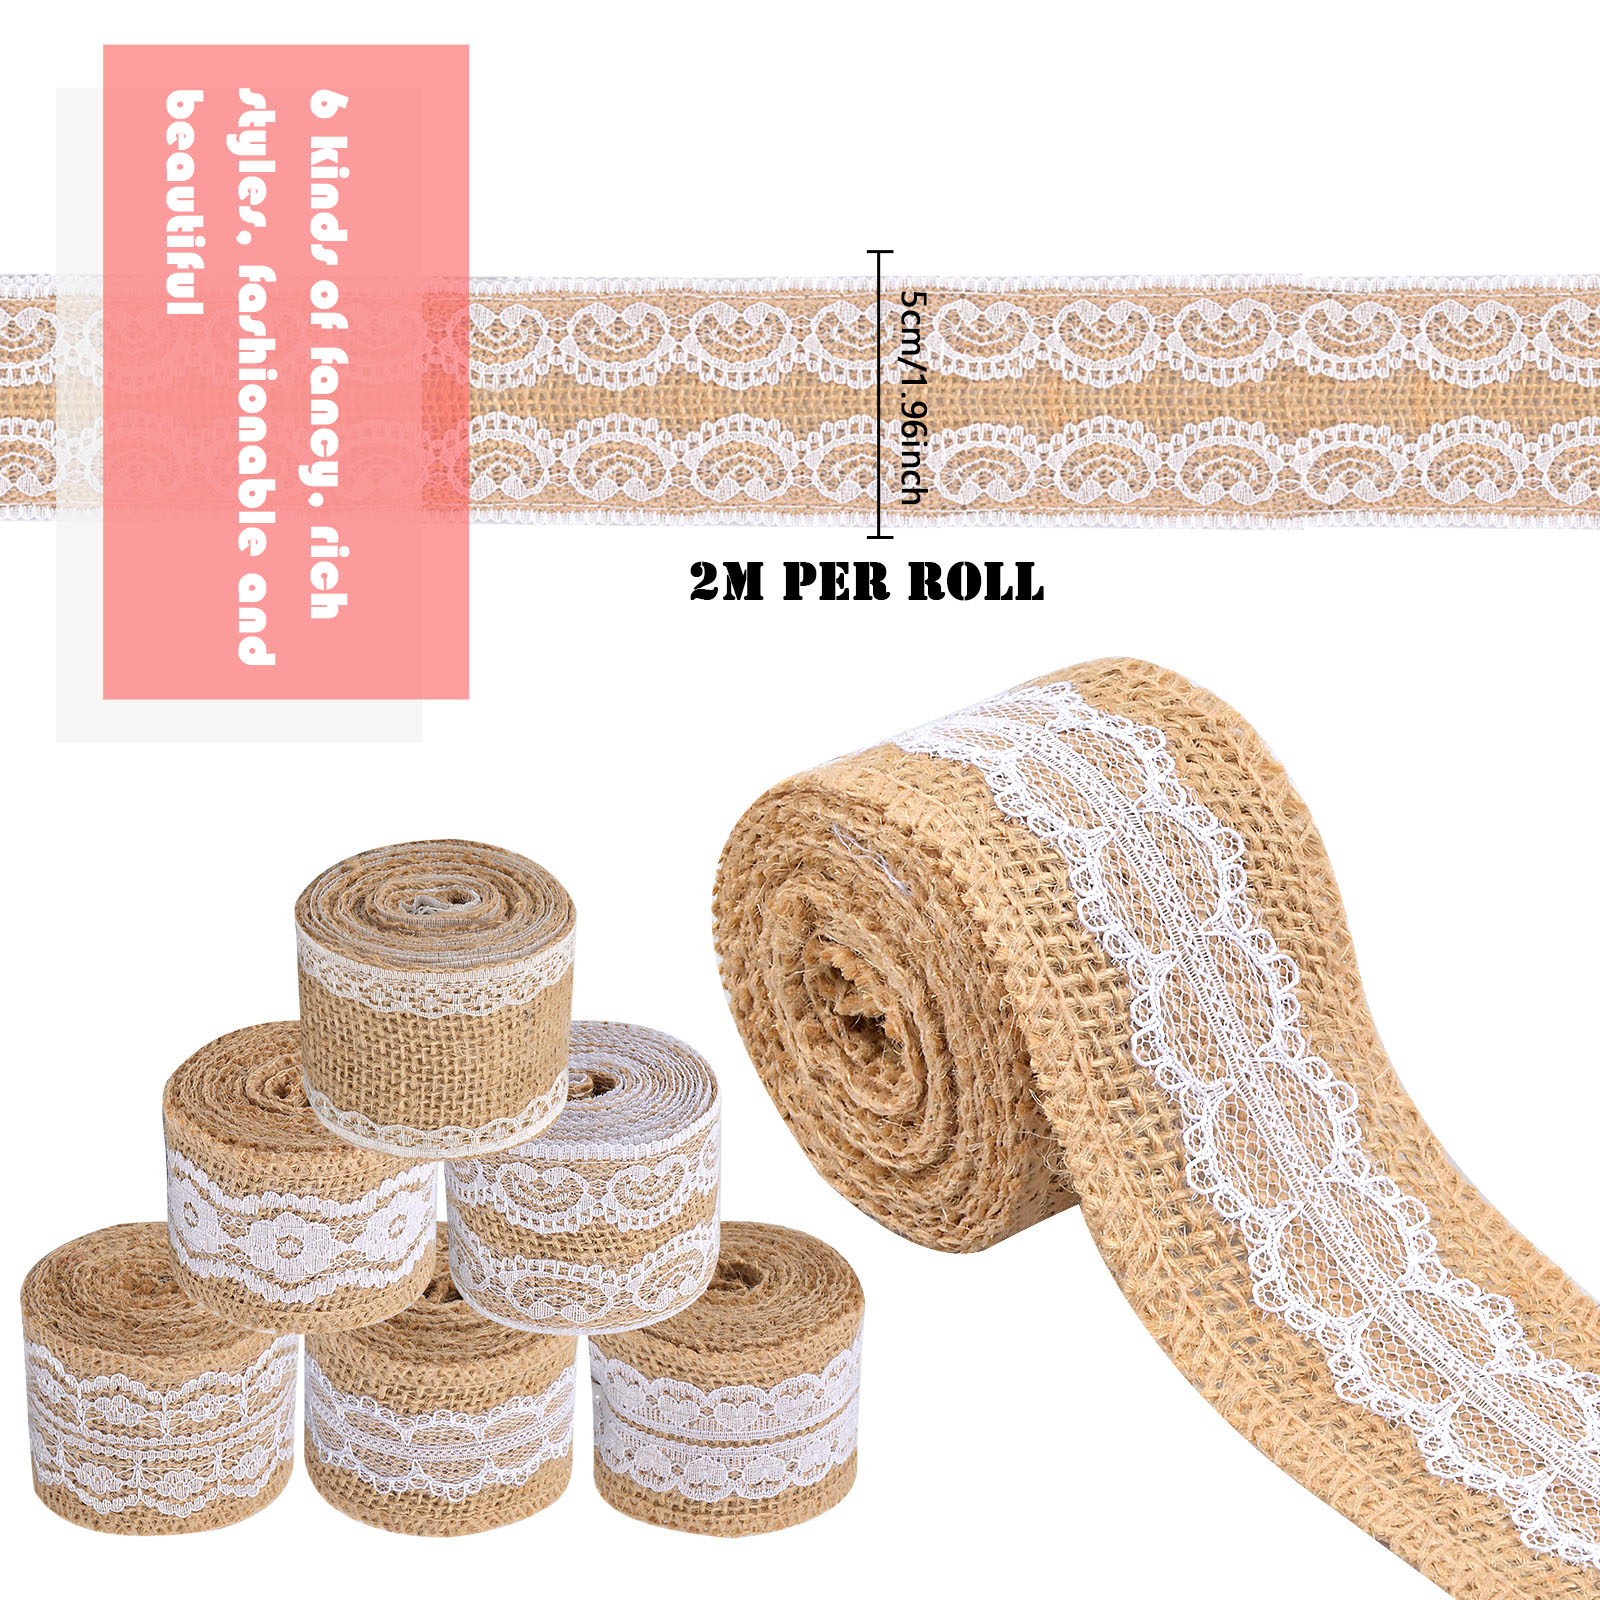 6 Yards, Natural Burlap with White Lace Ribbon Wedding Decorations for  sale online